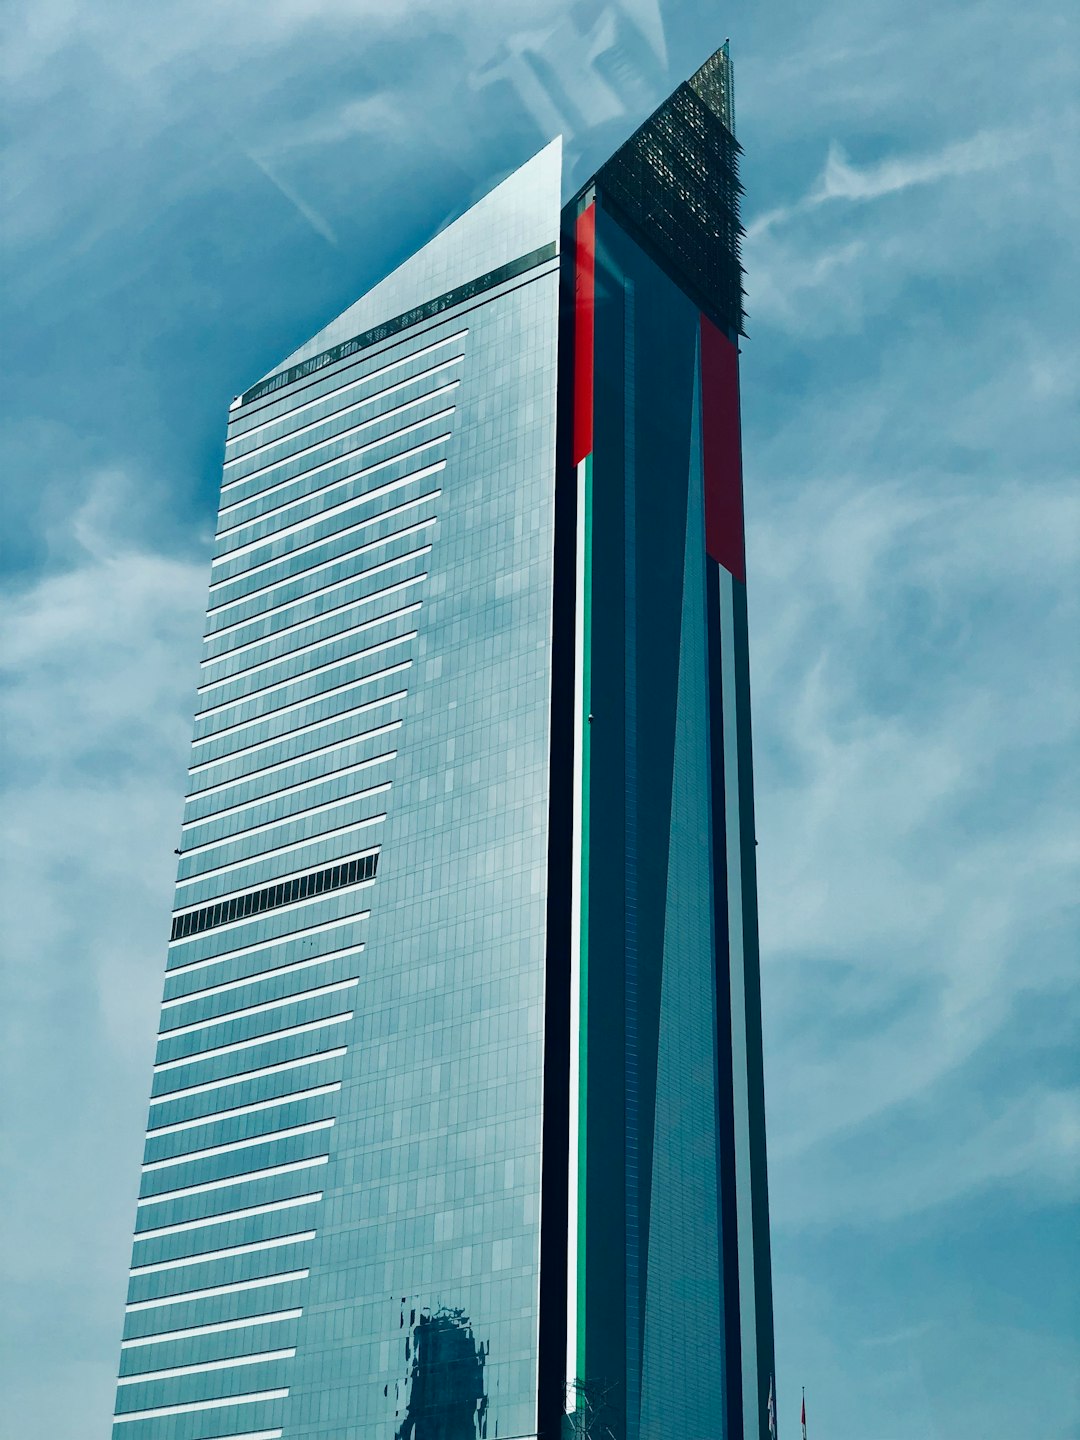 Travel Tips and Stories of Arenco Tower in United Arab Emirates